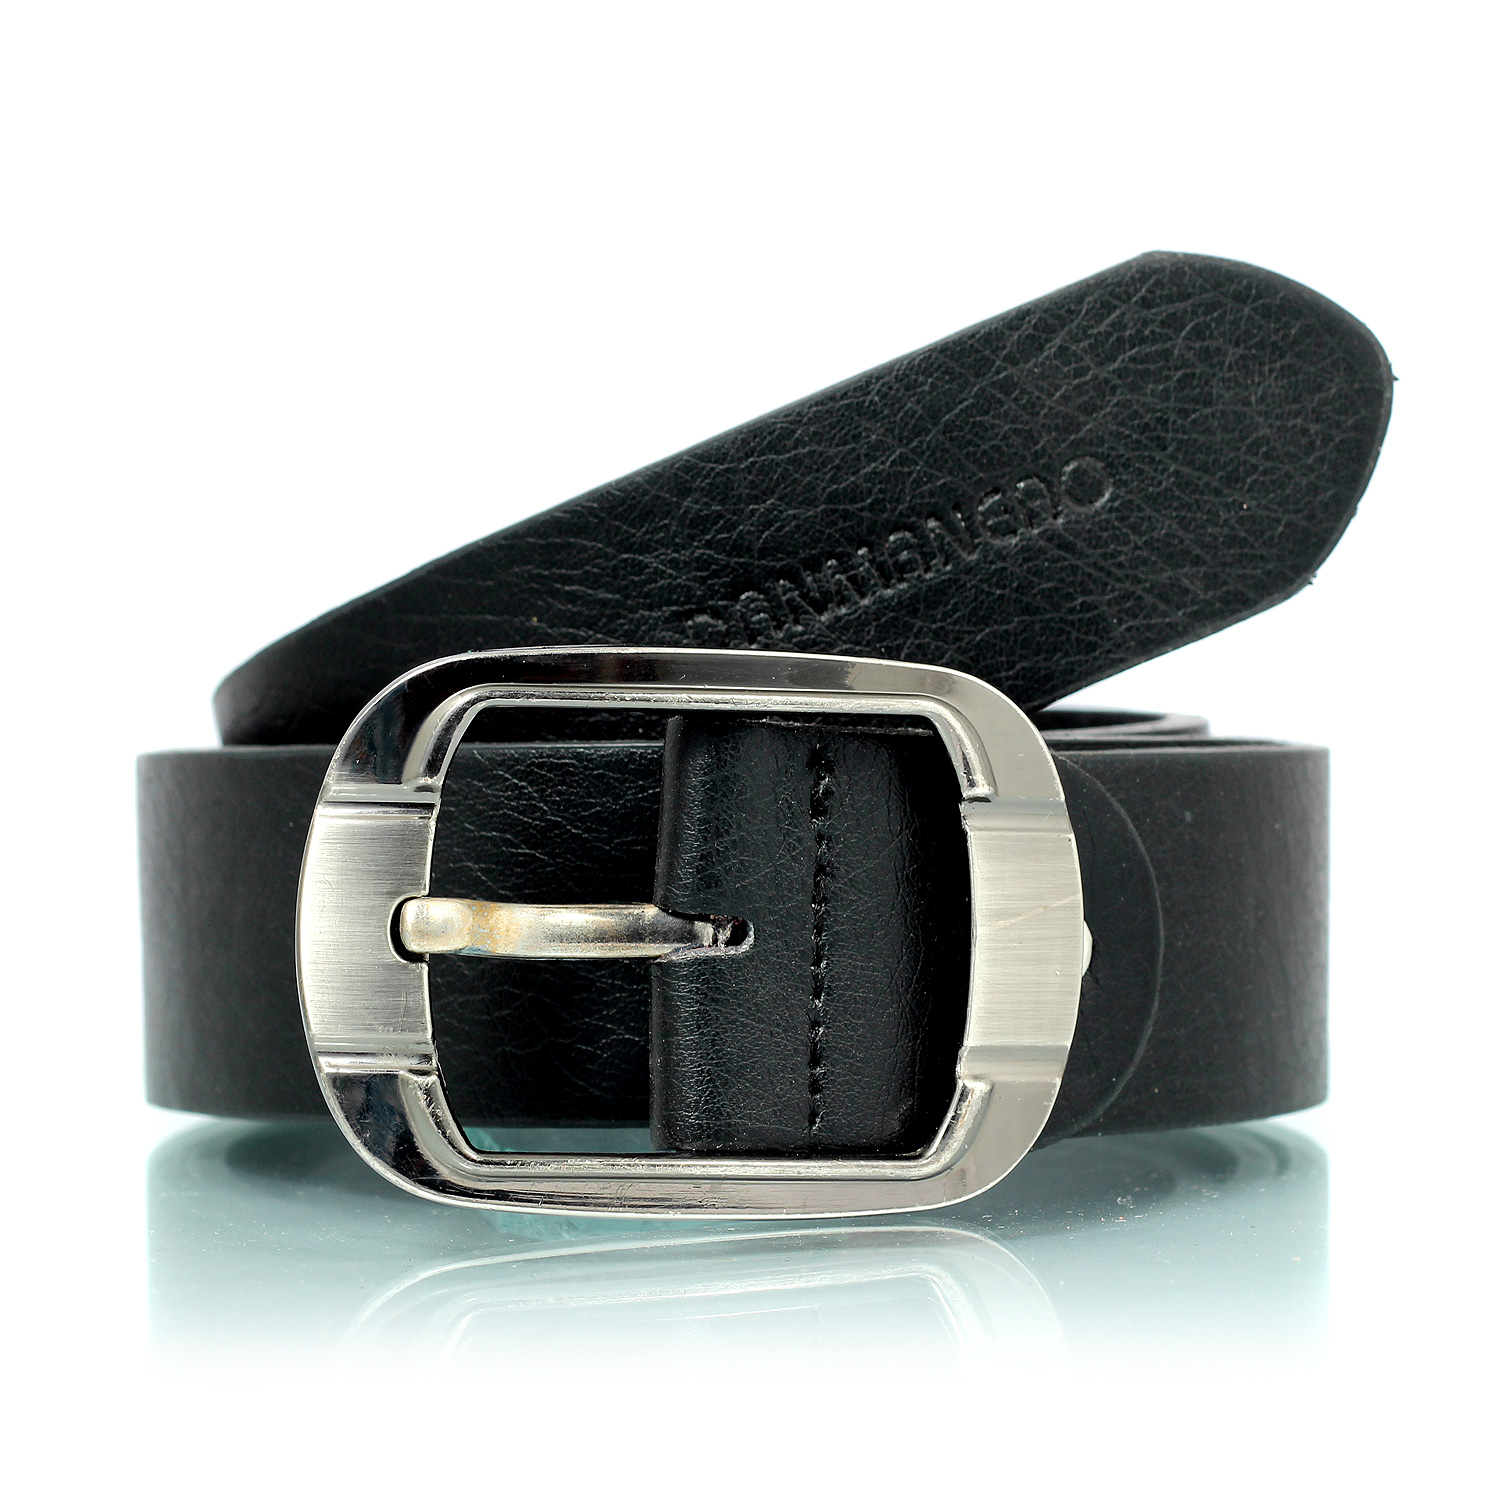 Round corner square stainless steel buckle with Armani textured leather belt